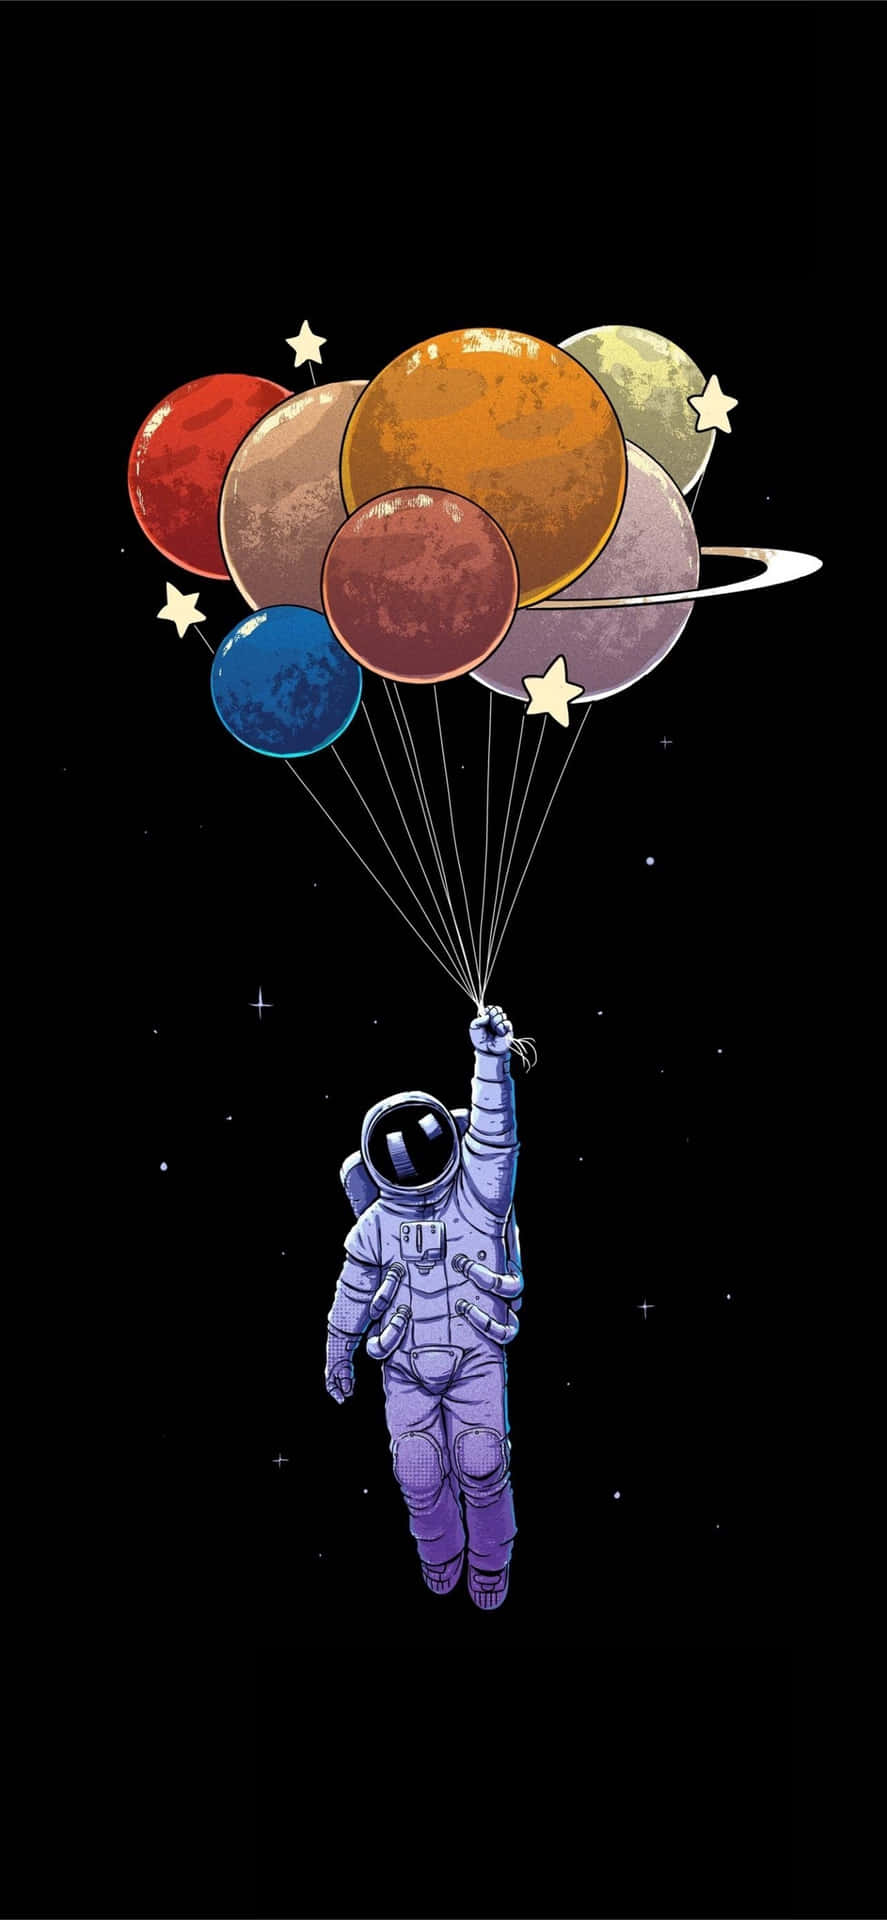 Planet Balloons With Astronaut Iphone Wallpaper